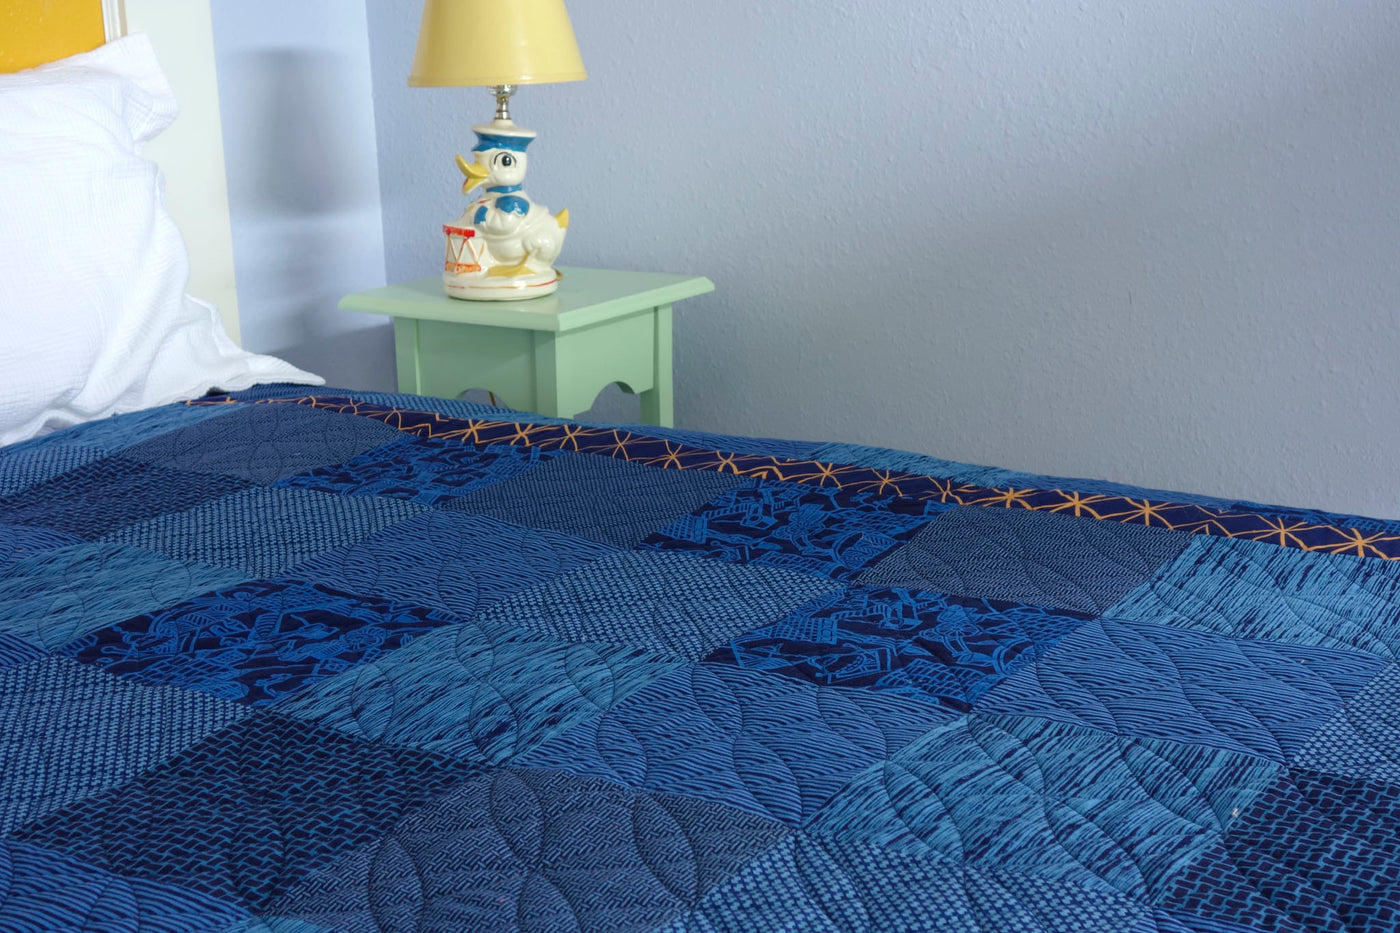 Indiglow, a king-sized quilt by Patricia Belyea made with Japanese yukata cottons